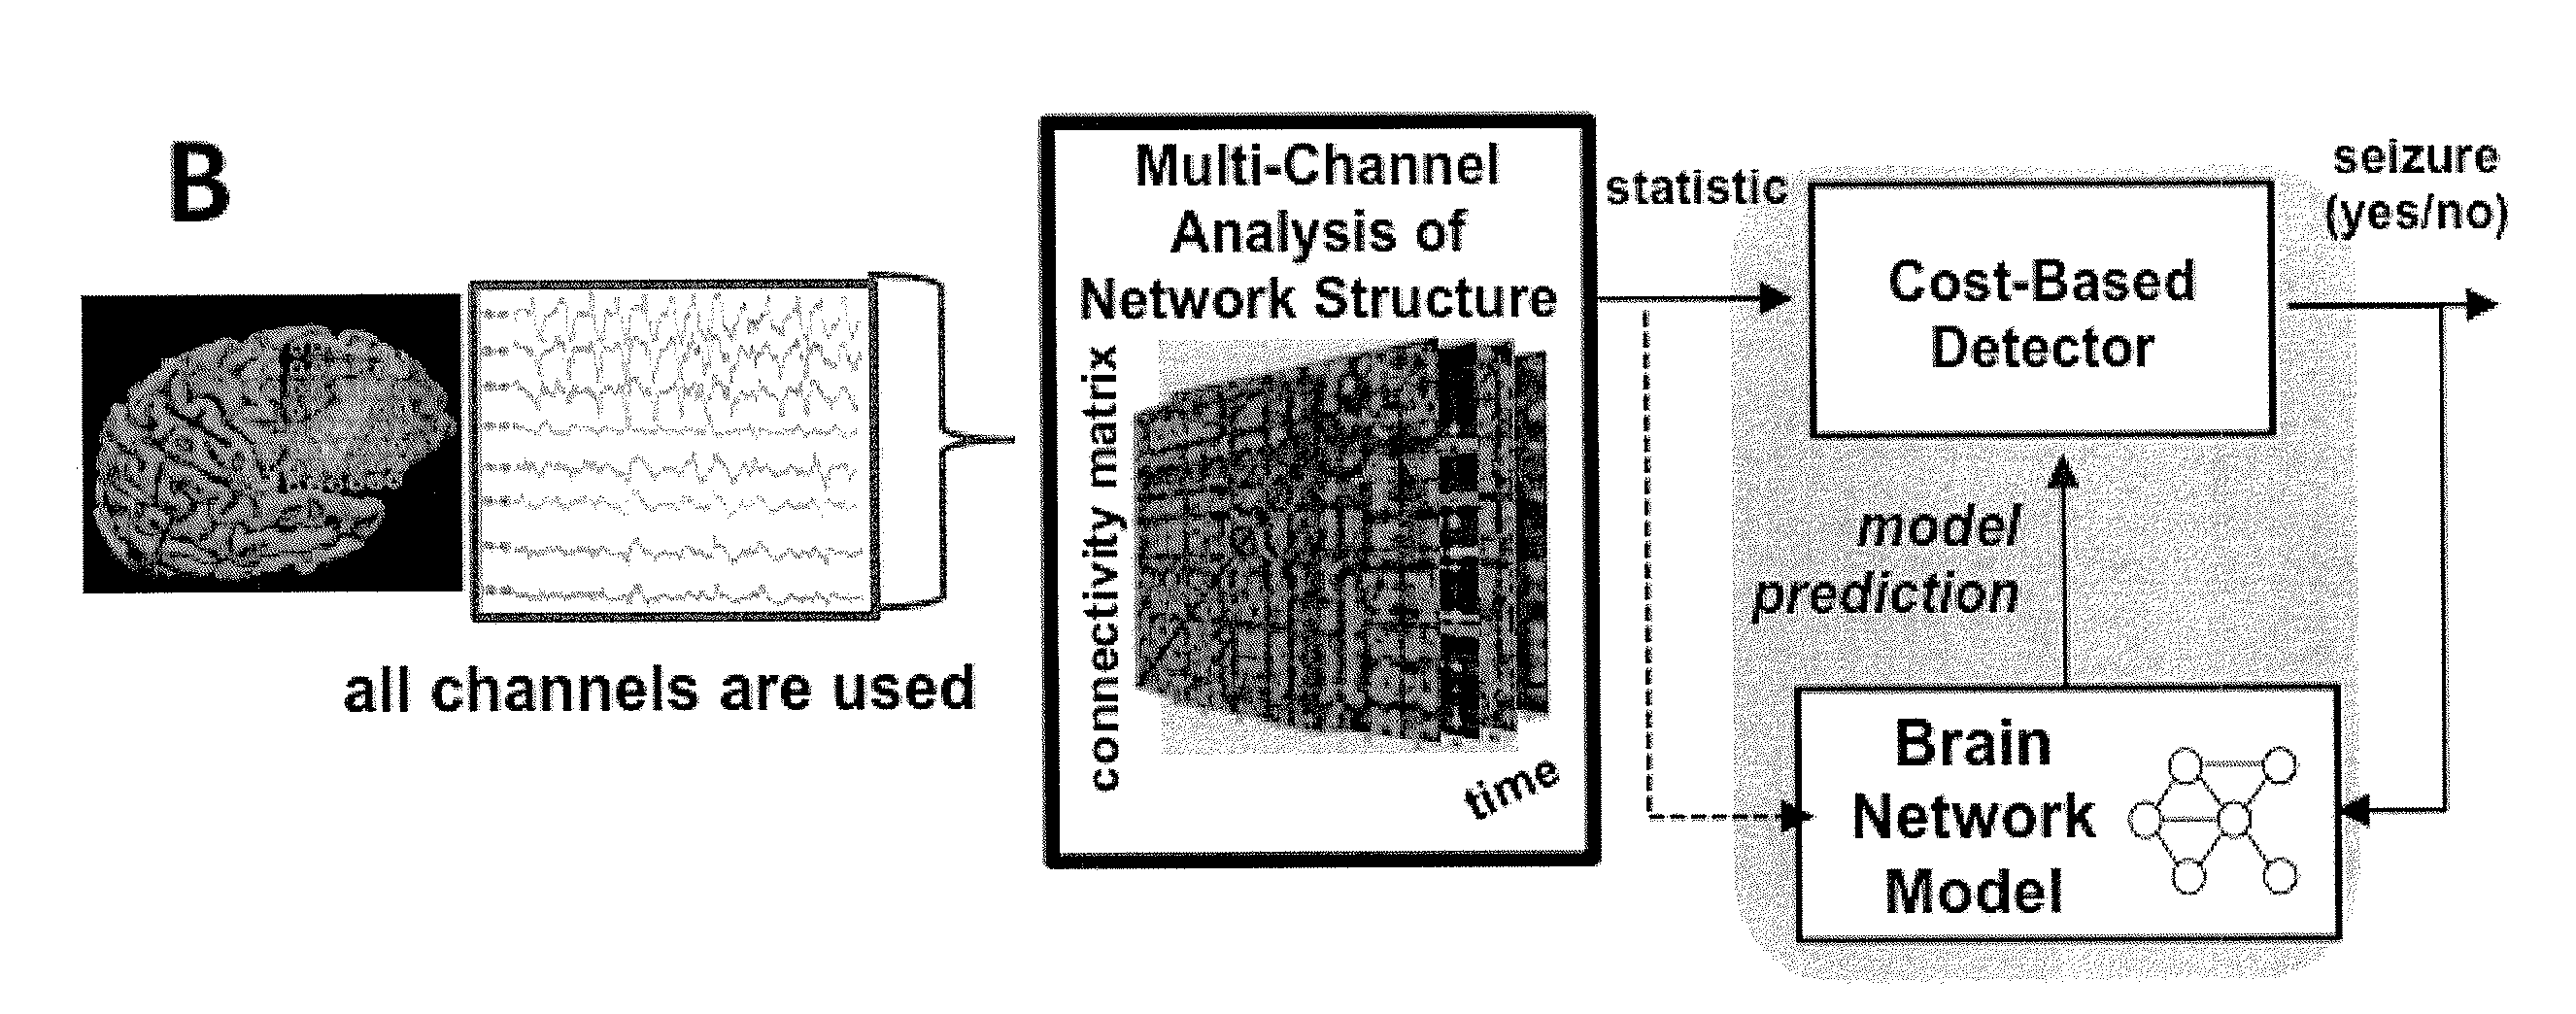 Seizure detection device and systems